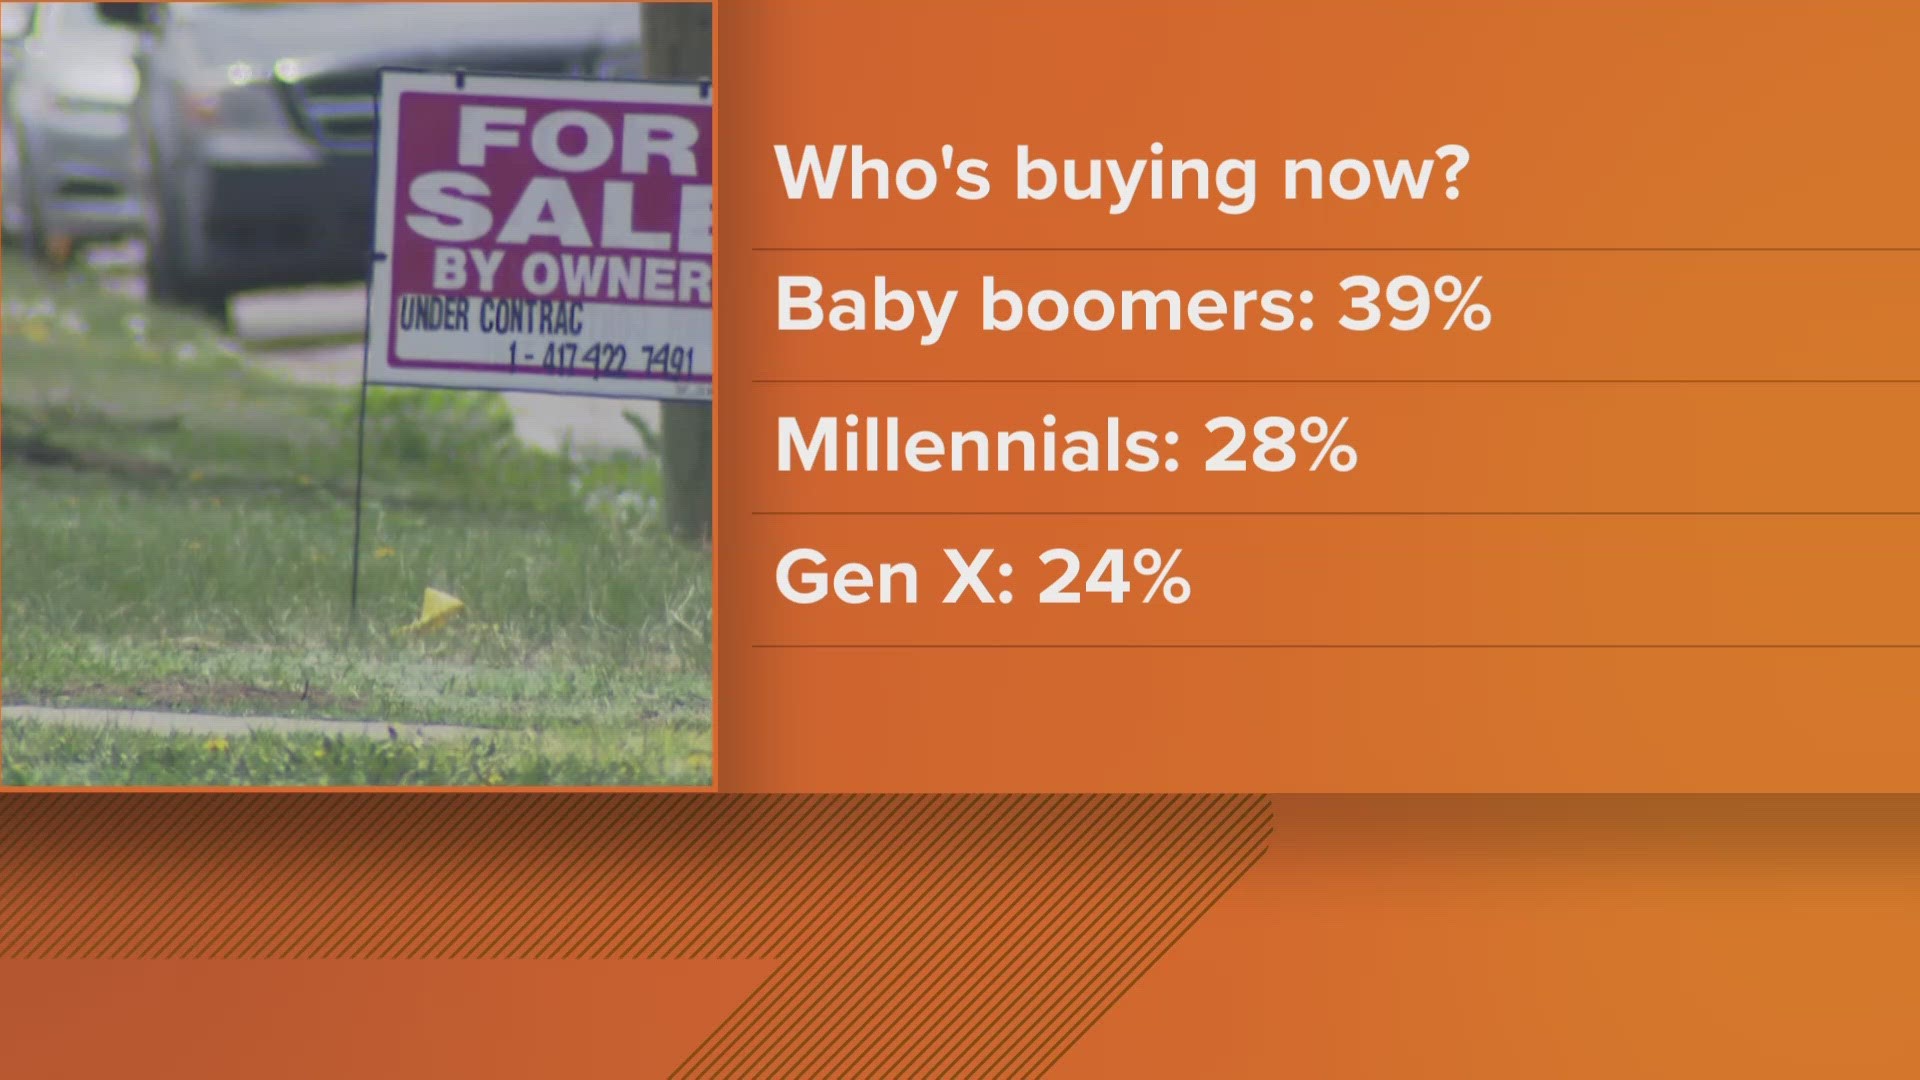 A new report says baby boomers are the big movers in today's housing market. Real estate expert Lane Lyon explains the trend.